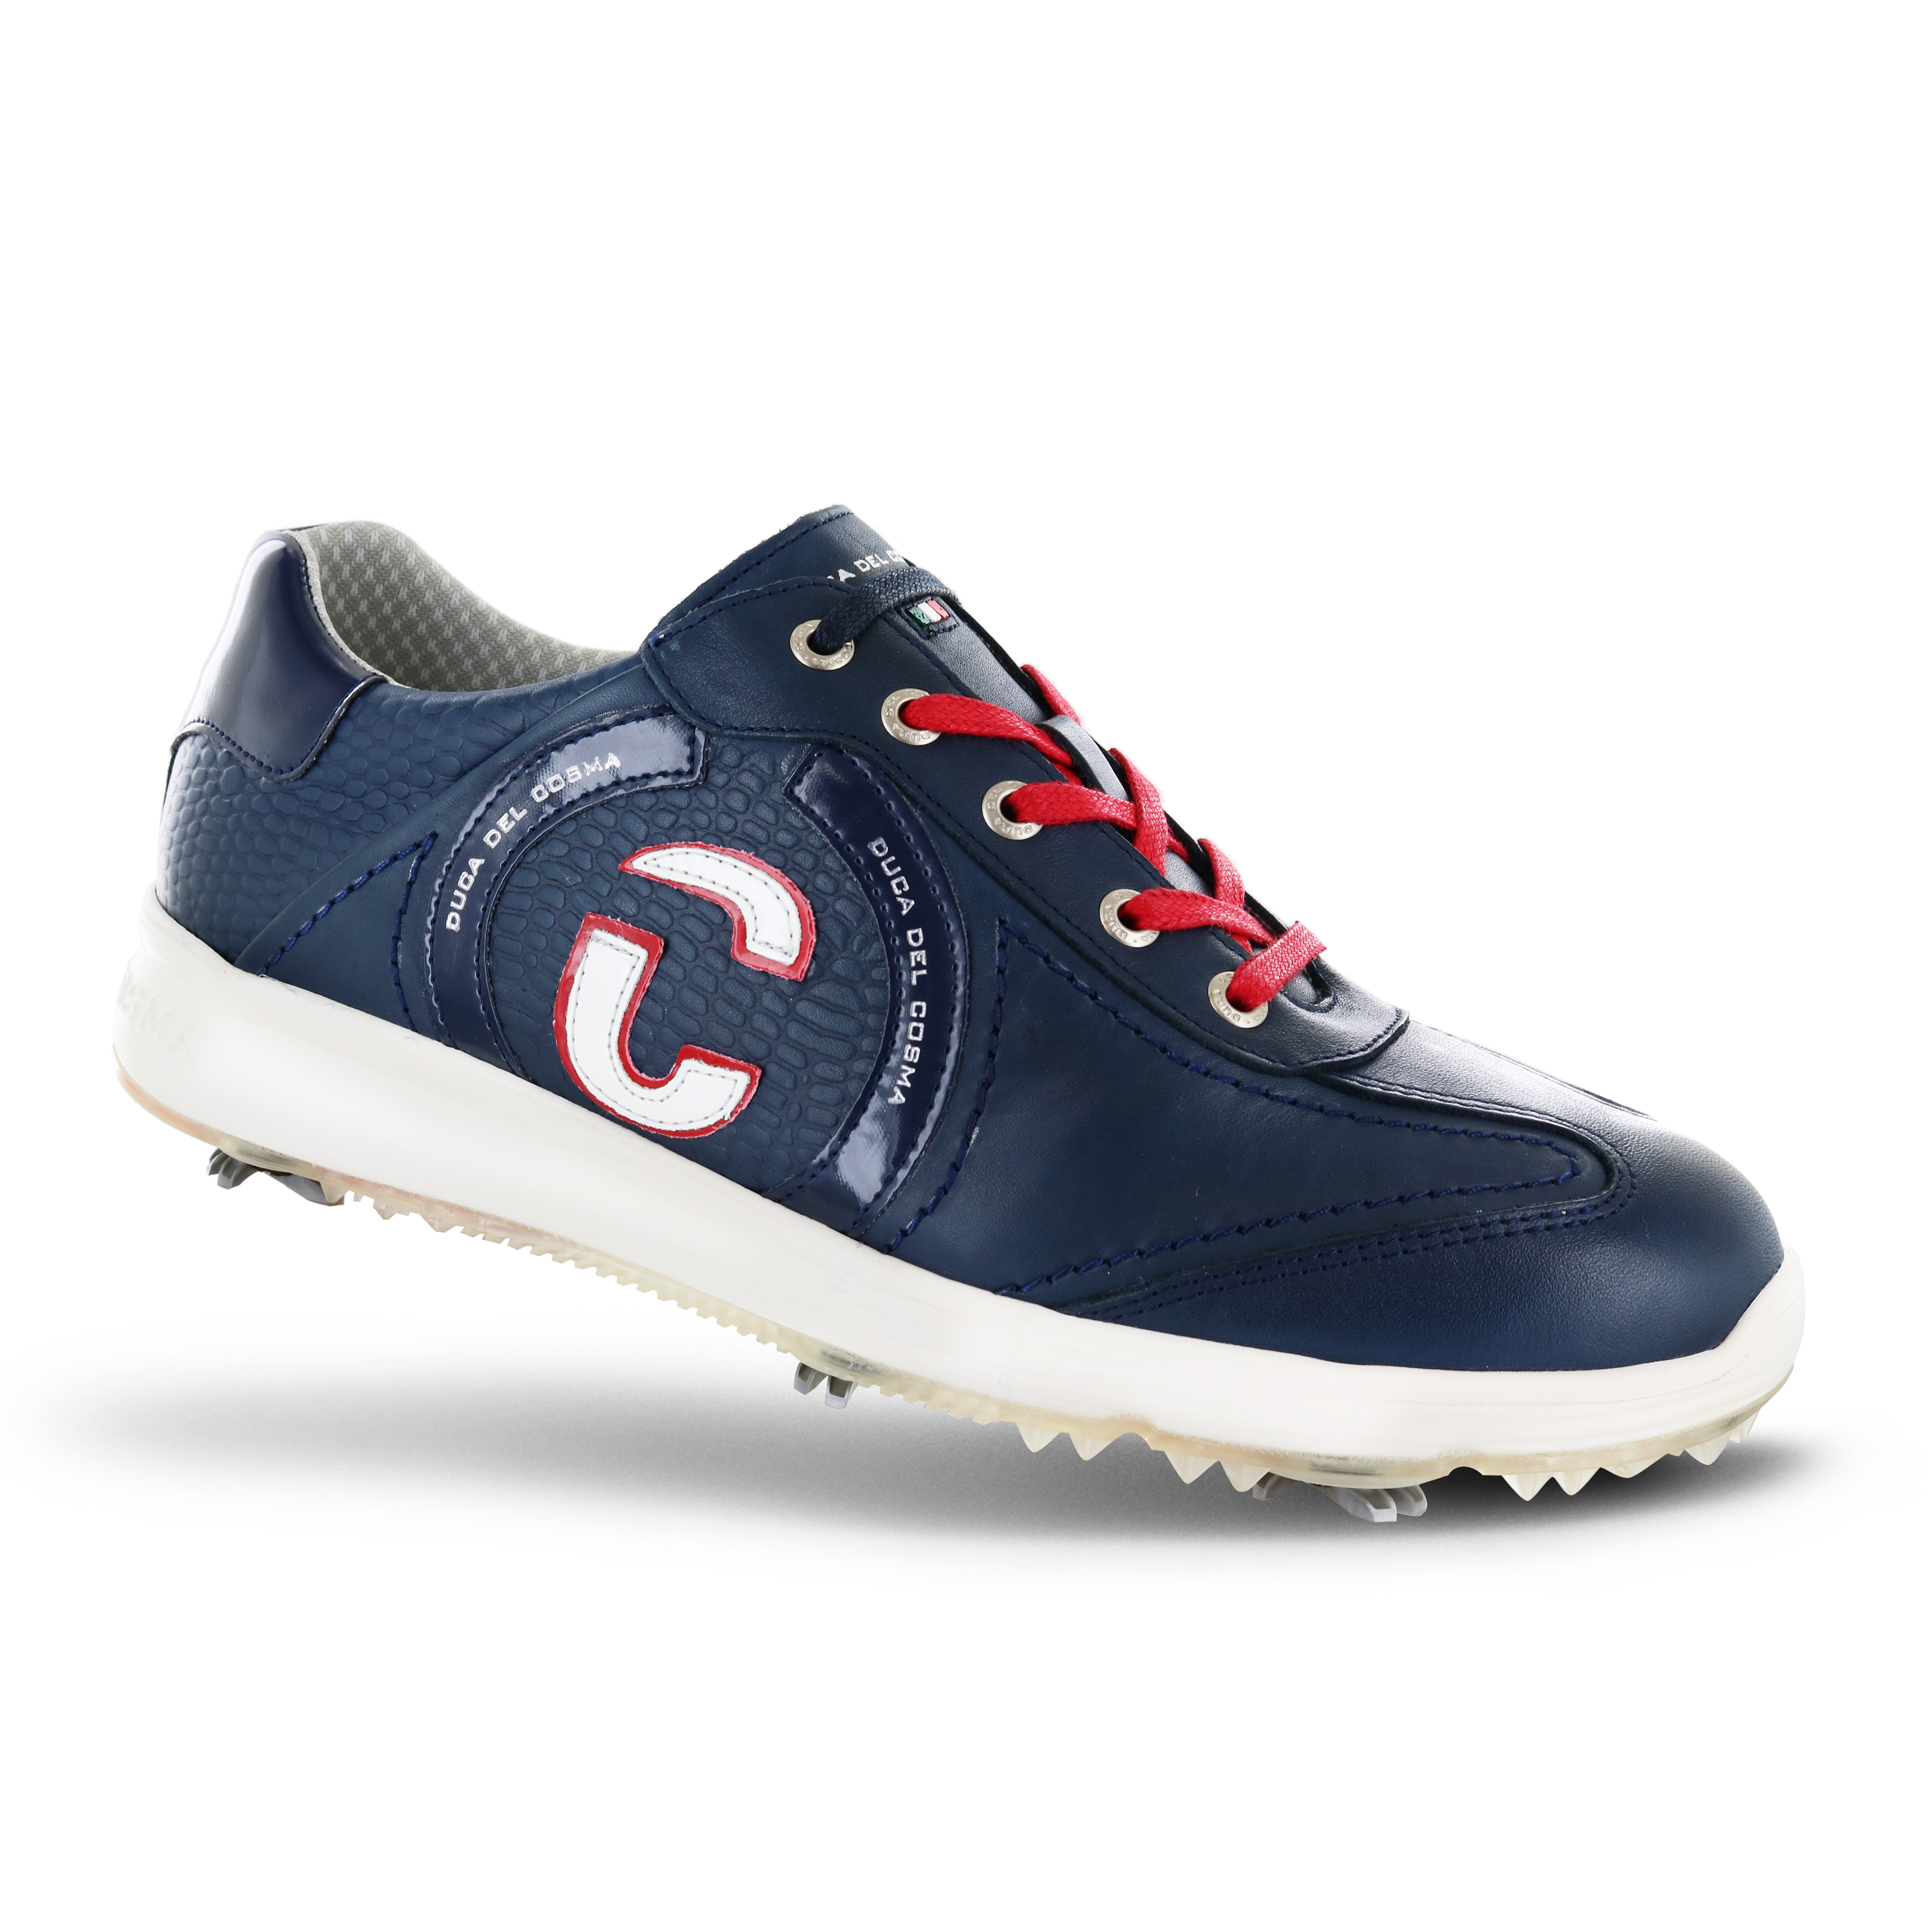 Duca Del Cosma steps up golf shoe production in Europe